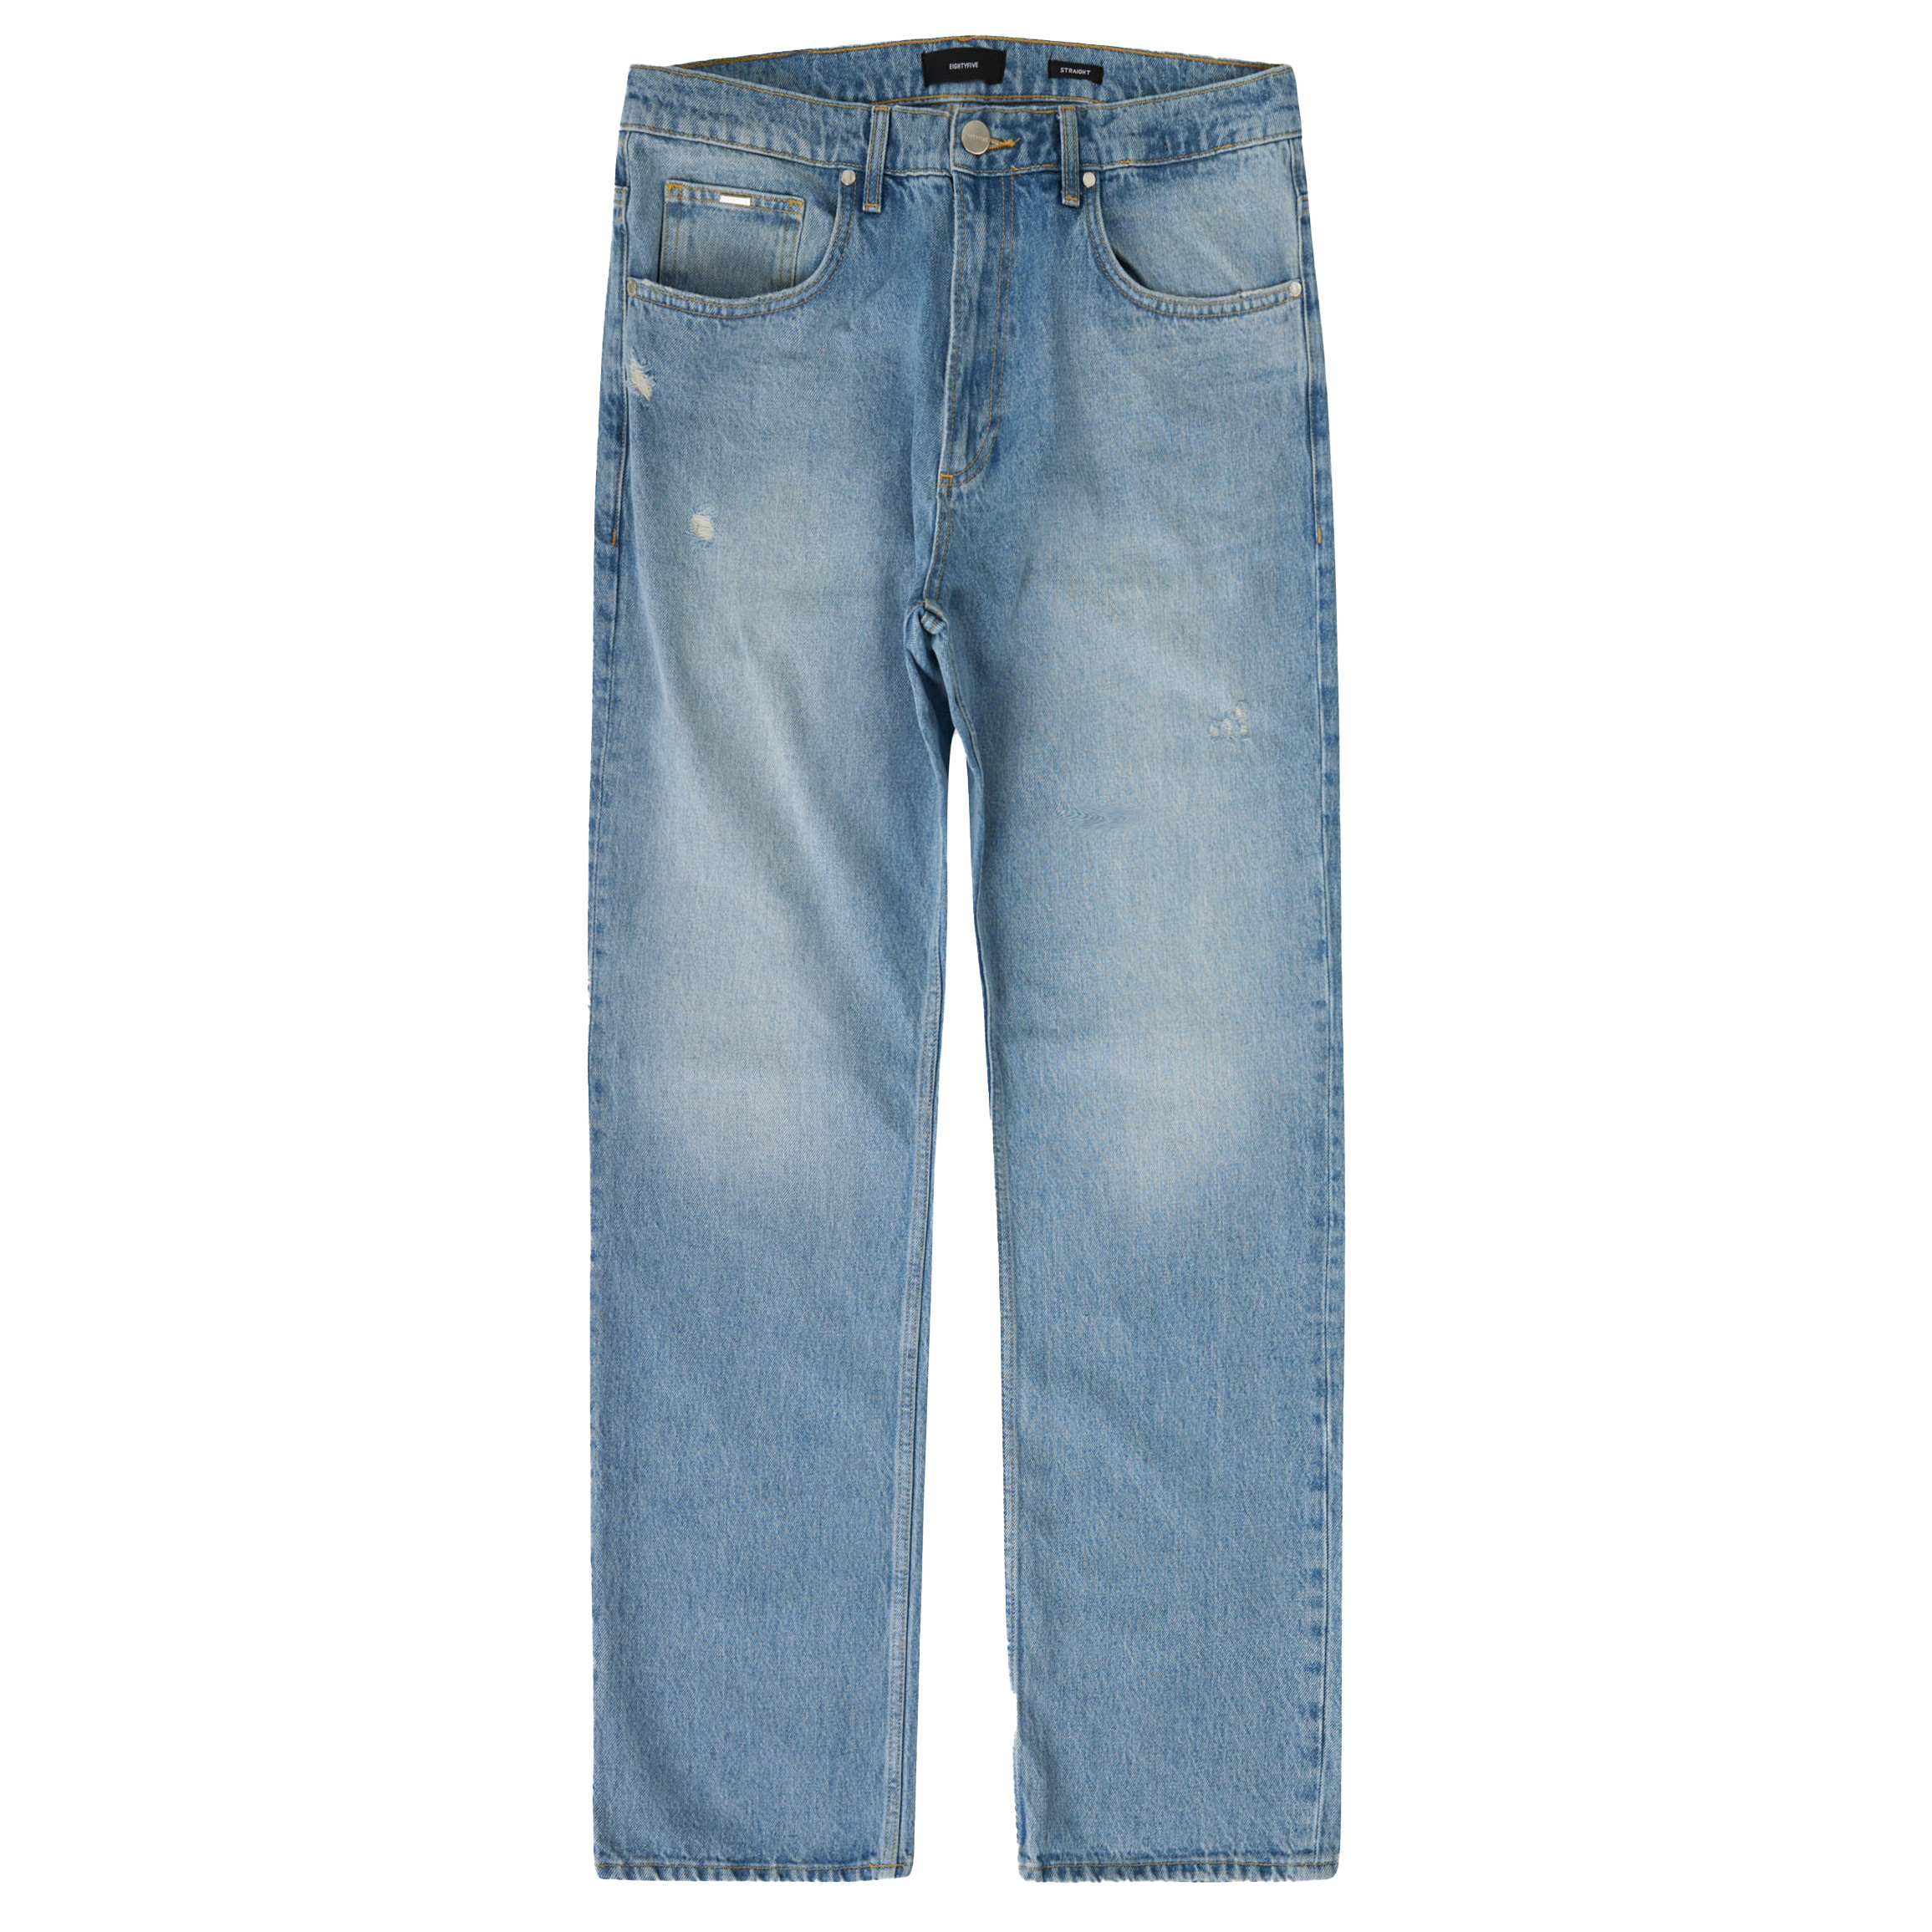 Eightyfive Distressed Jeans, Blue